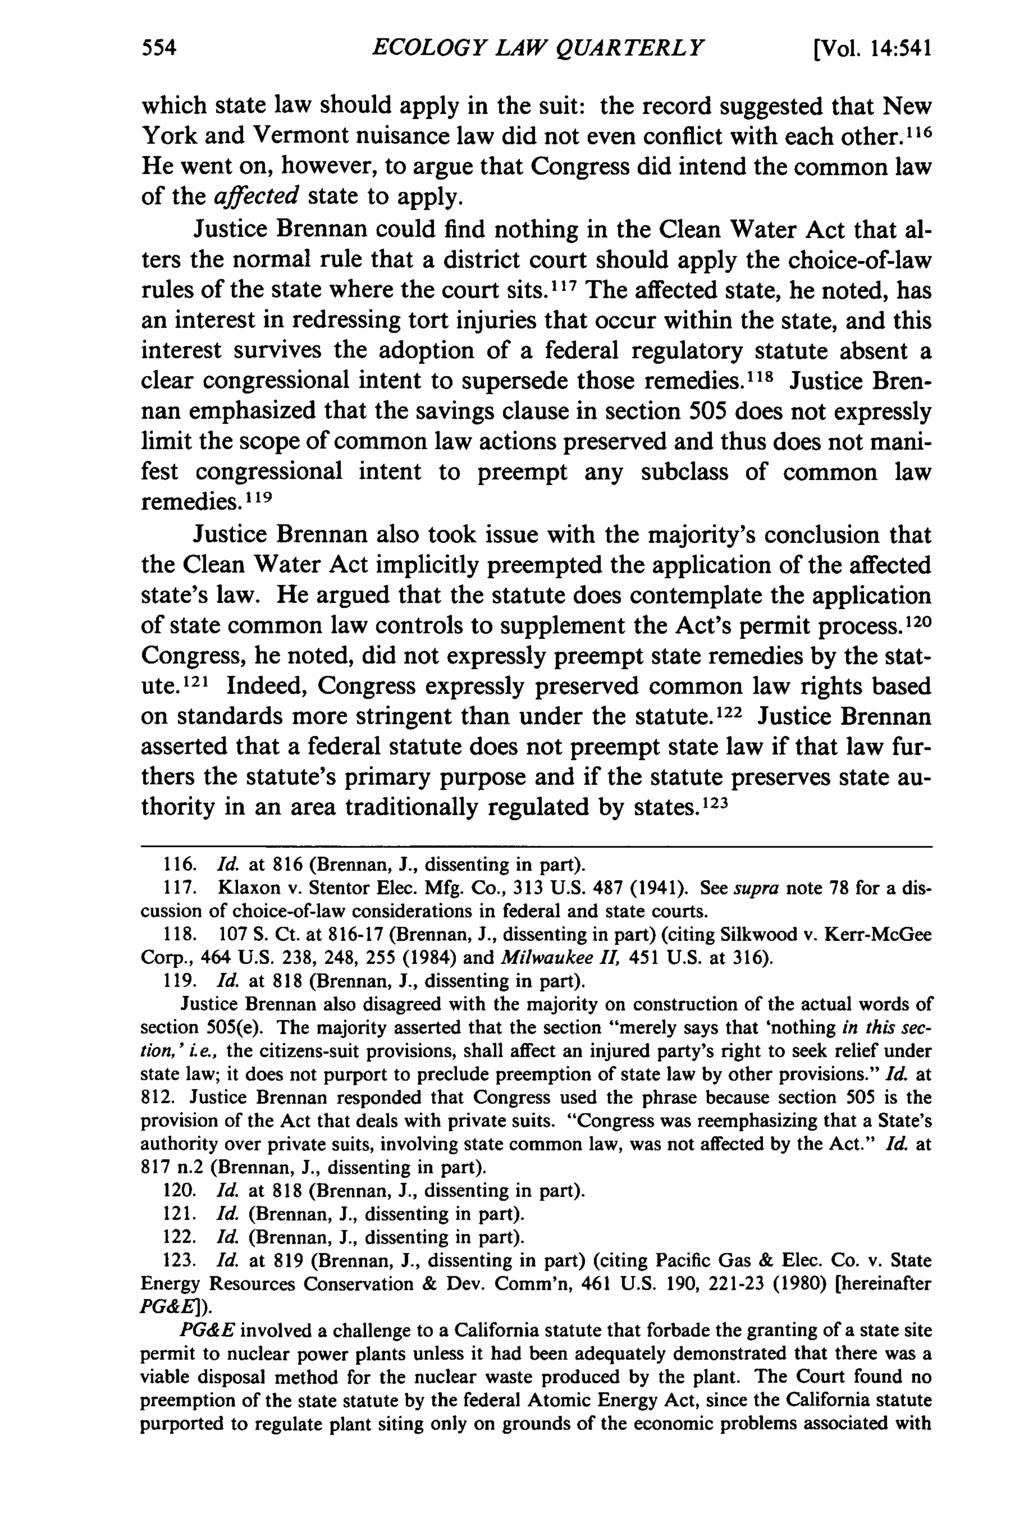 ECOLOGY LAW QUARTERLY [Vol. 14:541 which state law should apply in the suit: the record suggested that New York and Vermont nuisance law did not even conflict with each other.